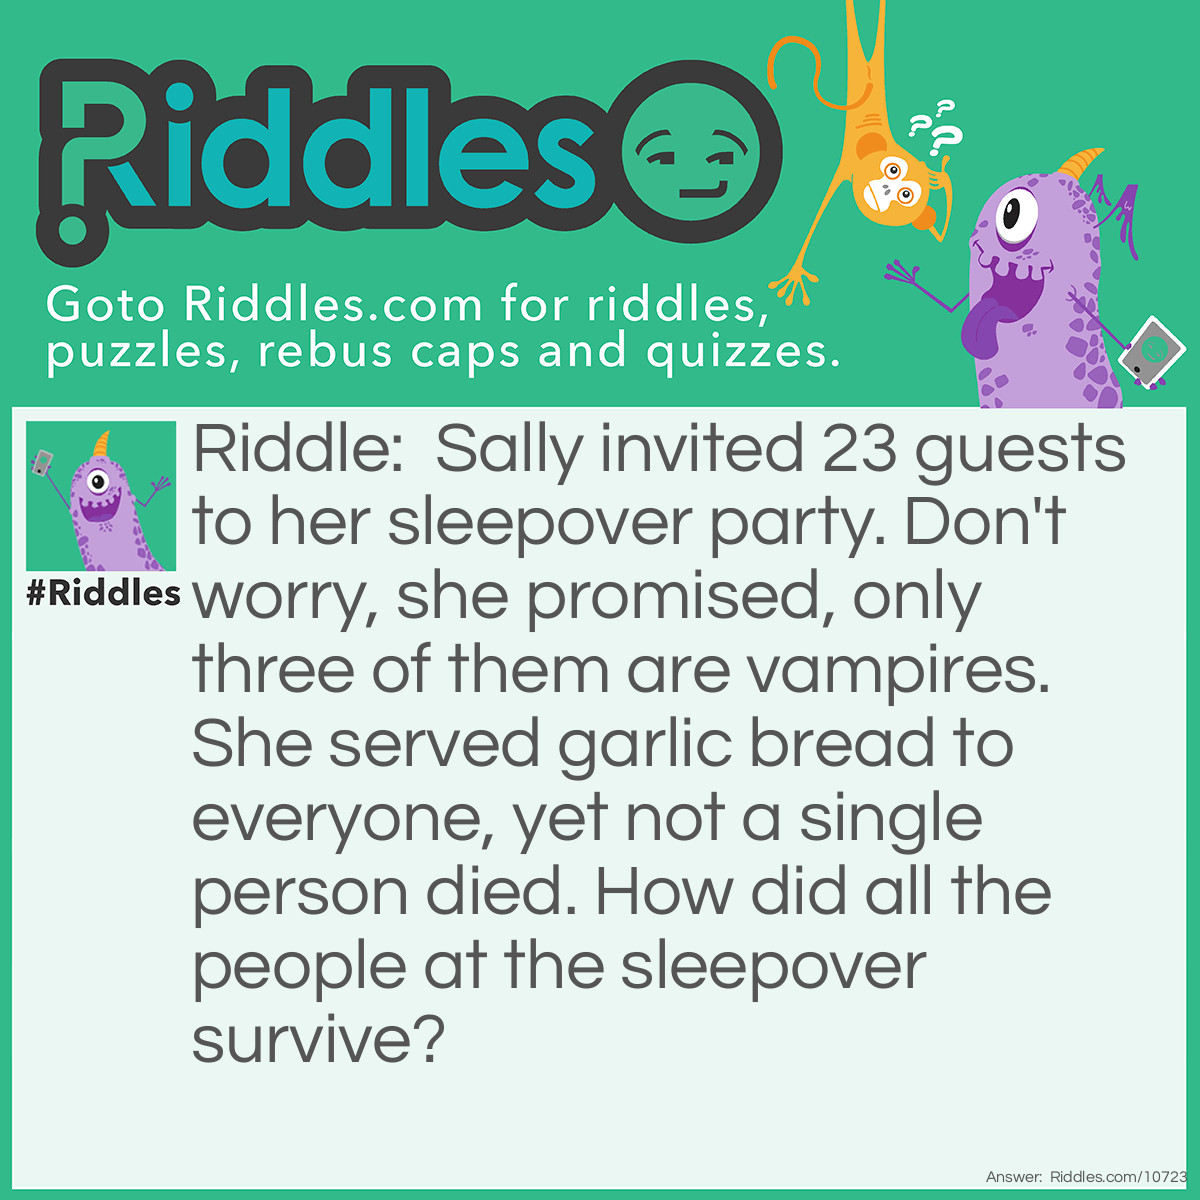 Riddle: Sally invited 23 guests to her sleepover party. Don't worry, she promised, only three of them are vampires. She served garlic bread to everyone, yet not a single person died. How did all the people at the sleepover survive? Answer: Vampires are not people. They died